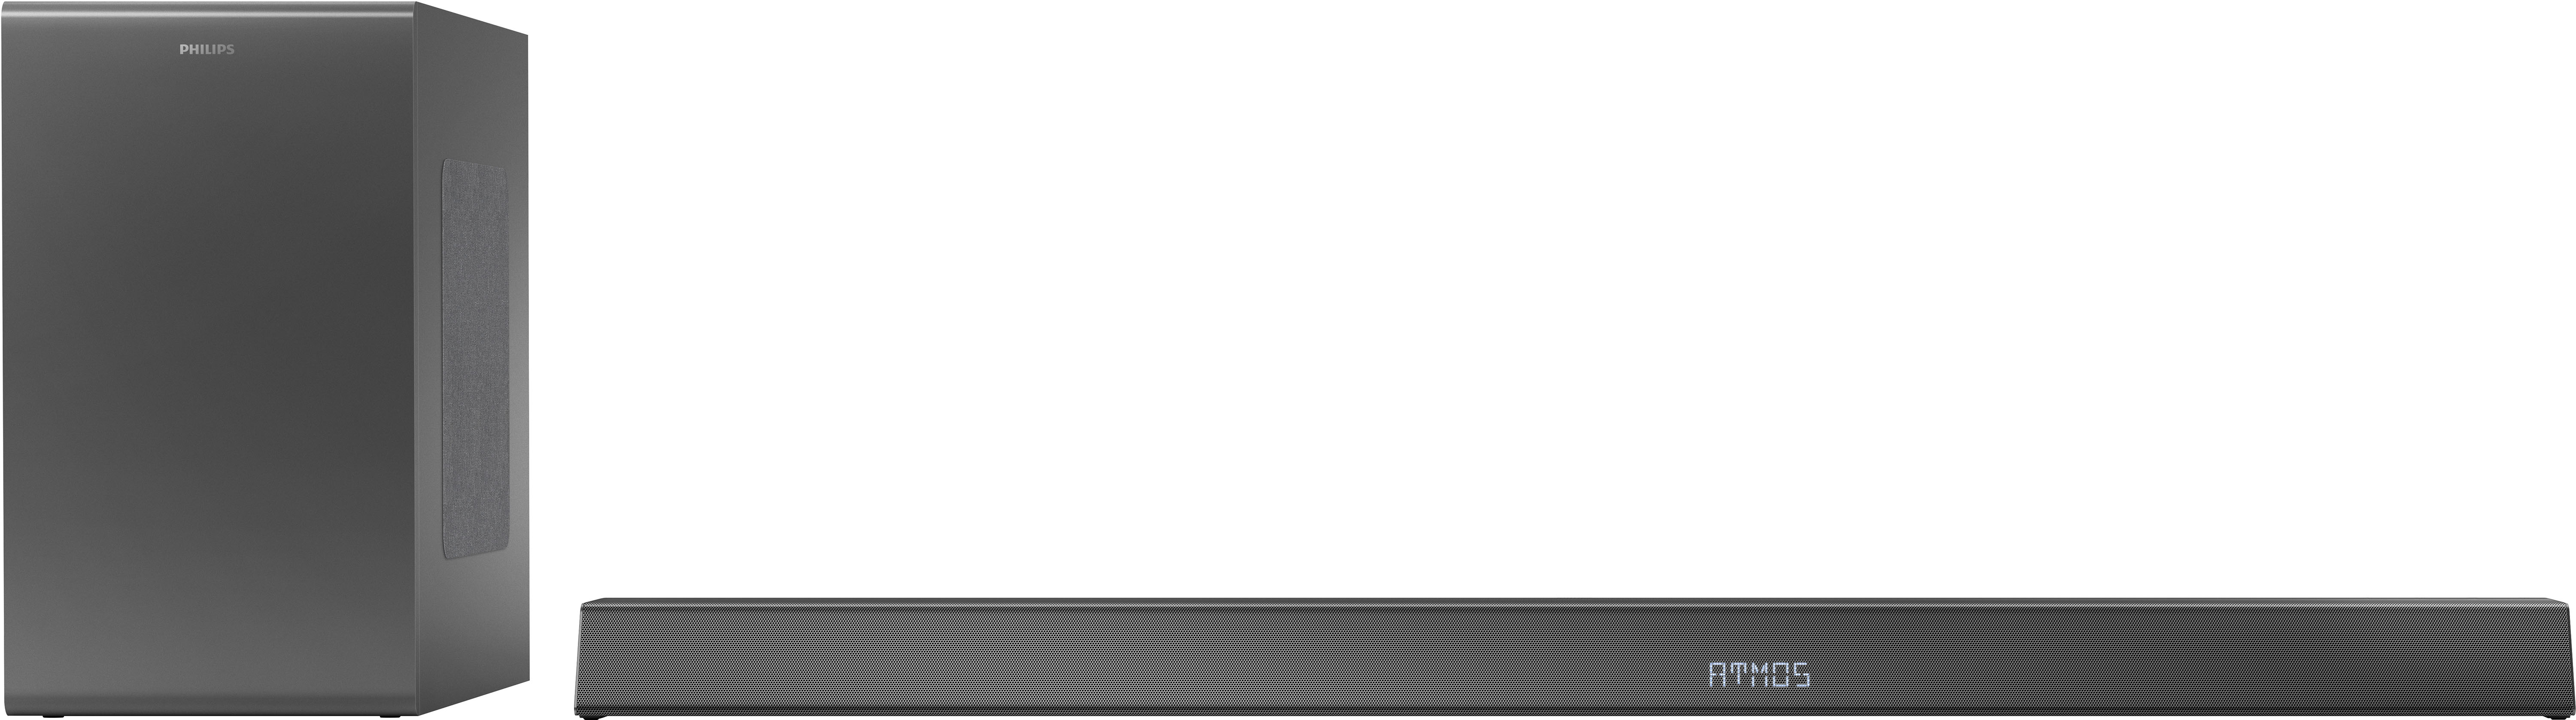 3.1.2-Channel Soundbar with Wireless Subwoofer, Dolby Atmos and expandable surround sound Dark grey TAB8905/37 - Best Buy